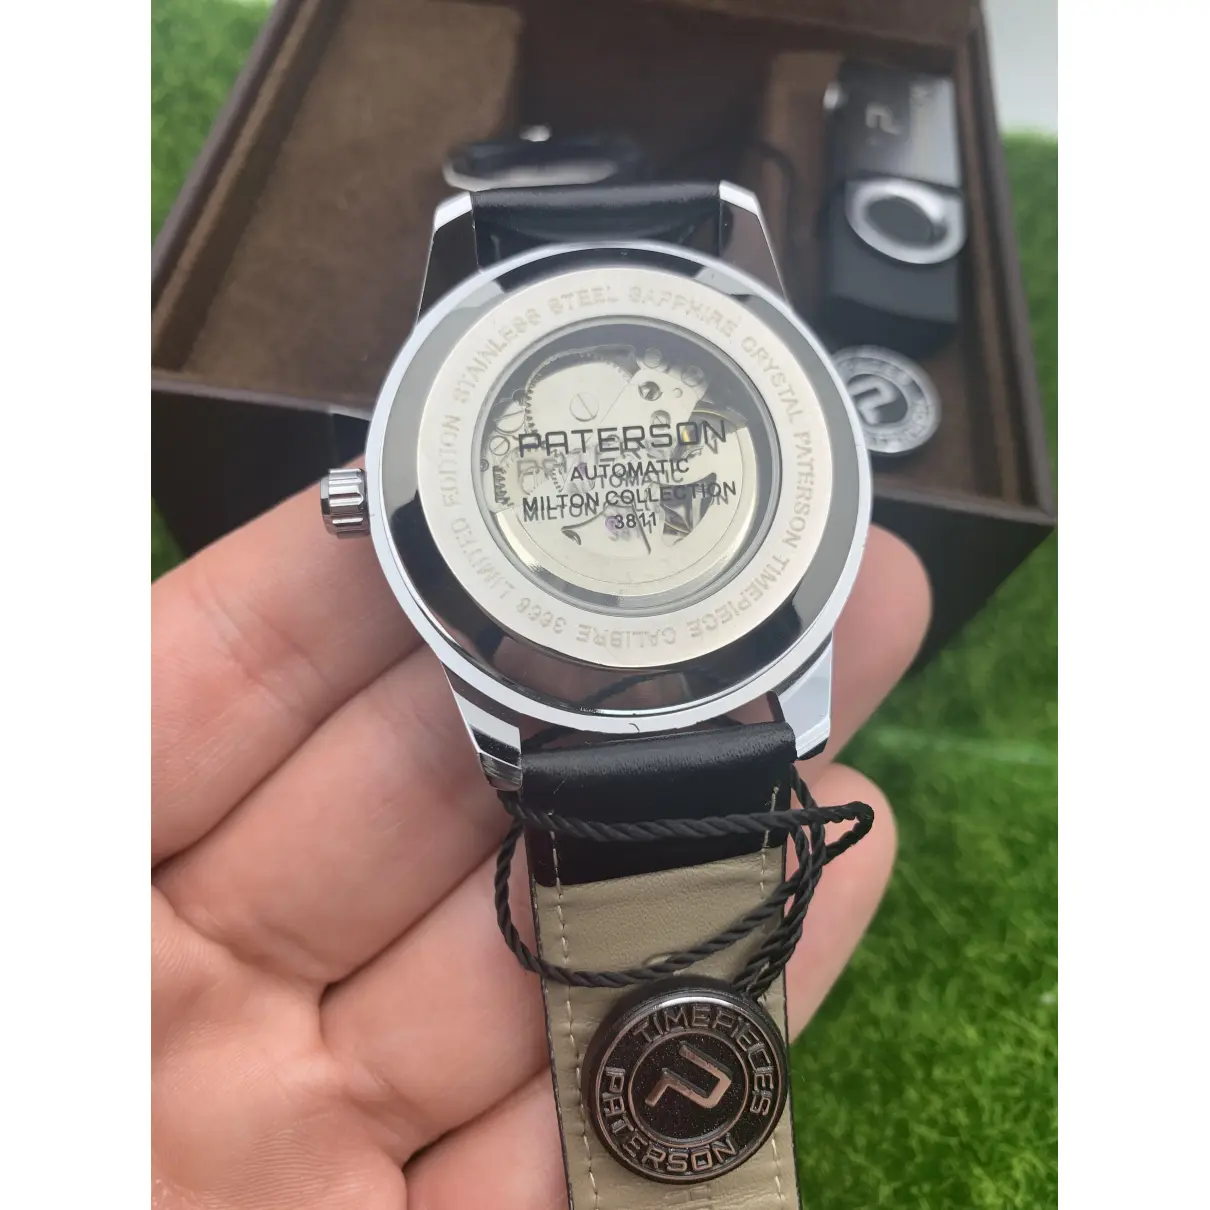 Buy Paterson Watch online